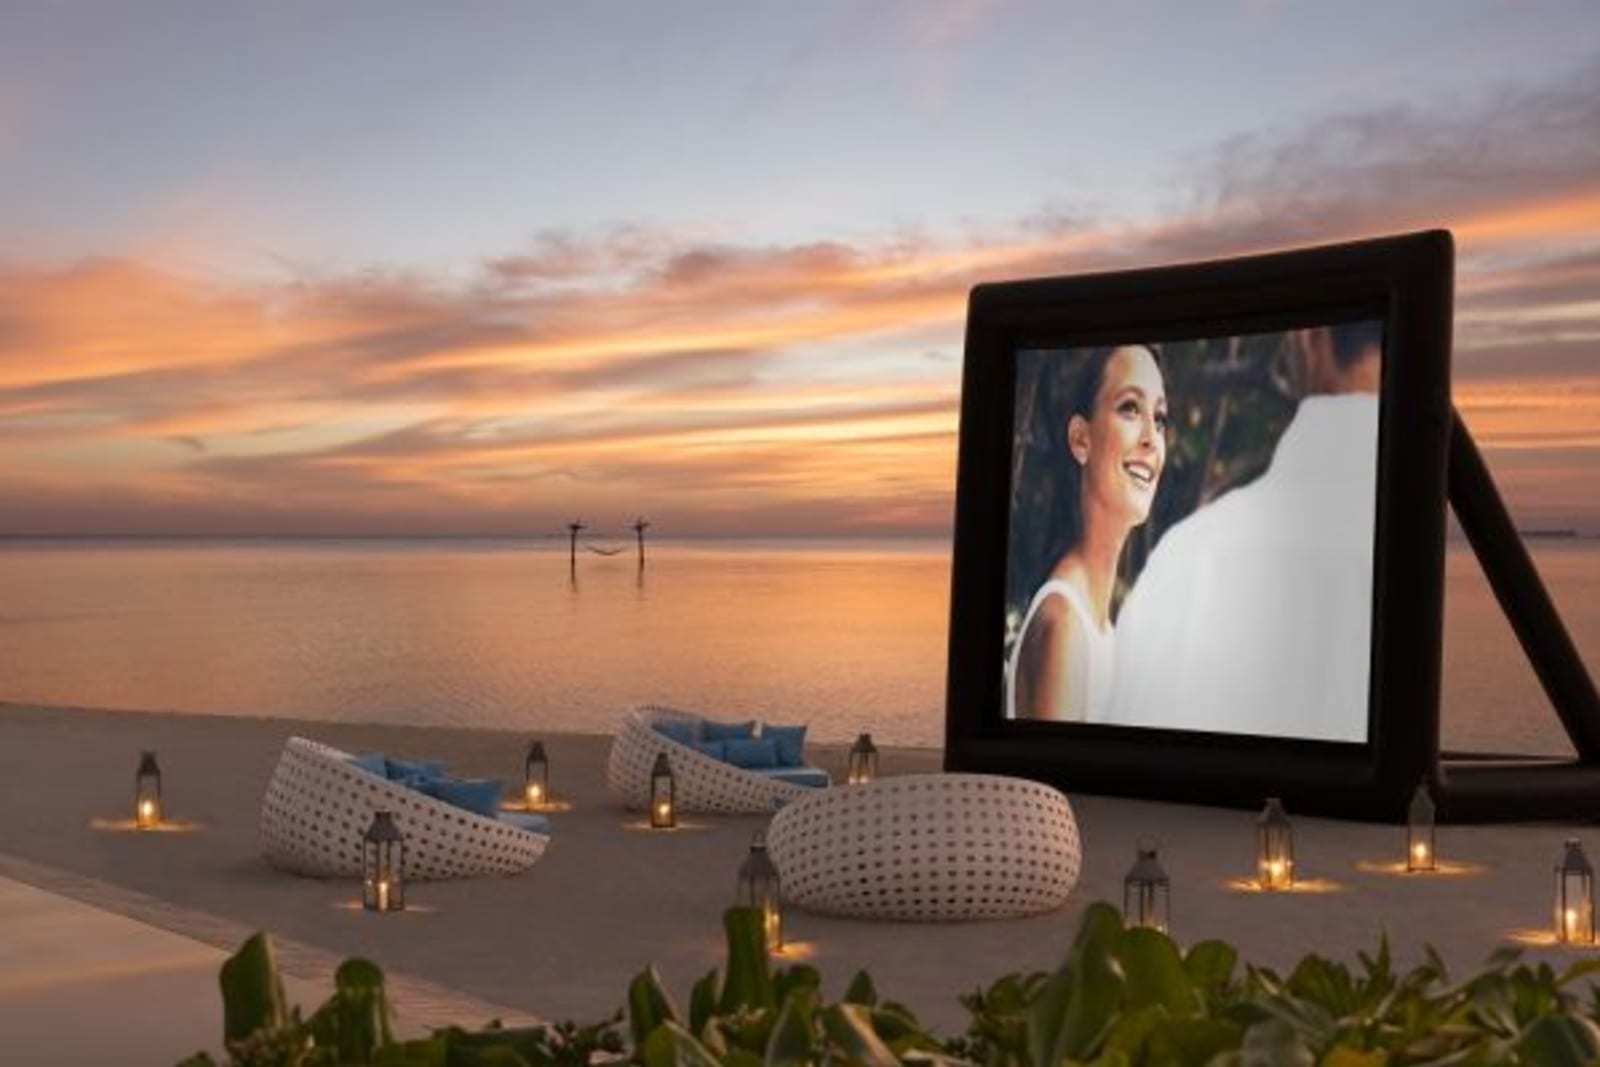 Large projected movie screen on beach front with large cushioned chairs at sunset